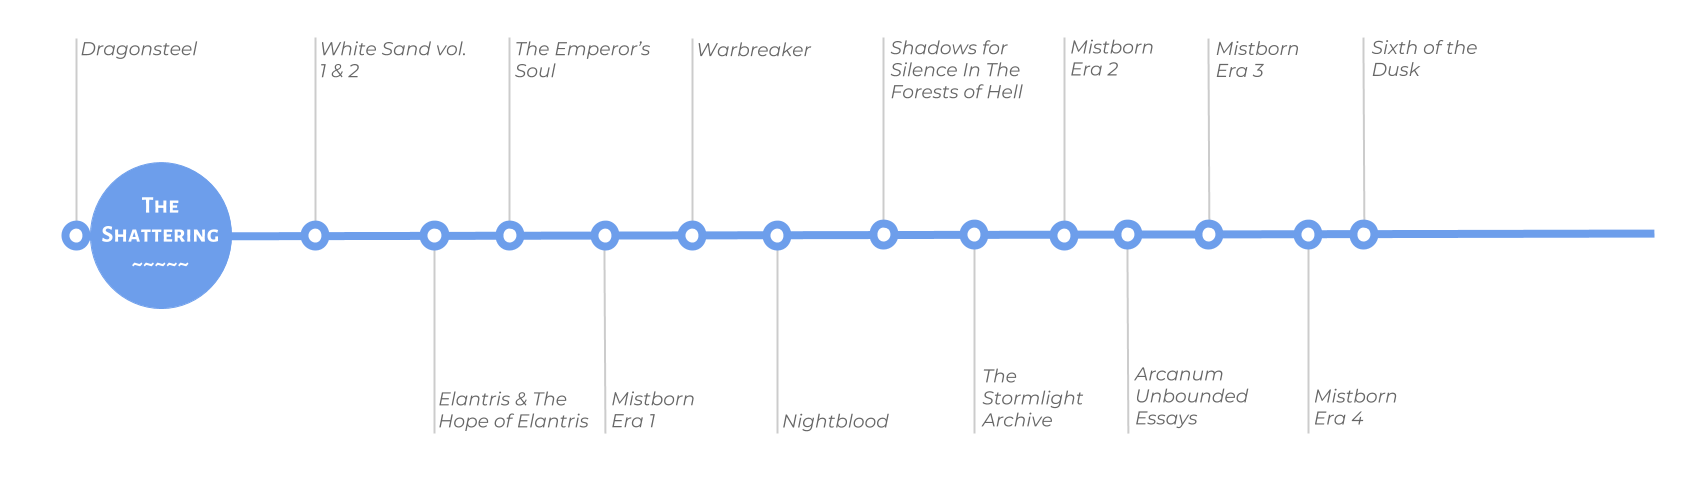 Visual Cosmere Timeline  The way of kings, Stormlight archive